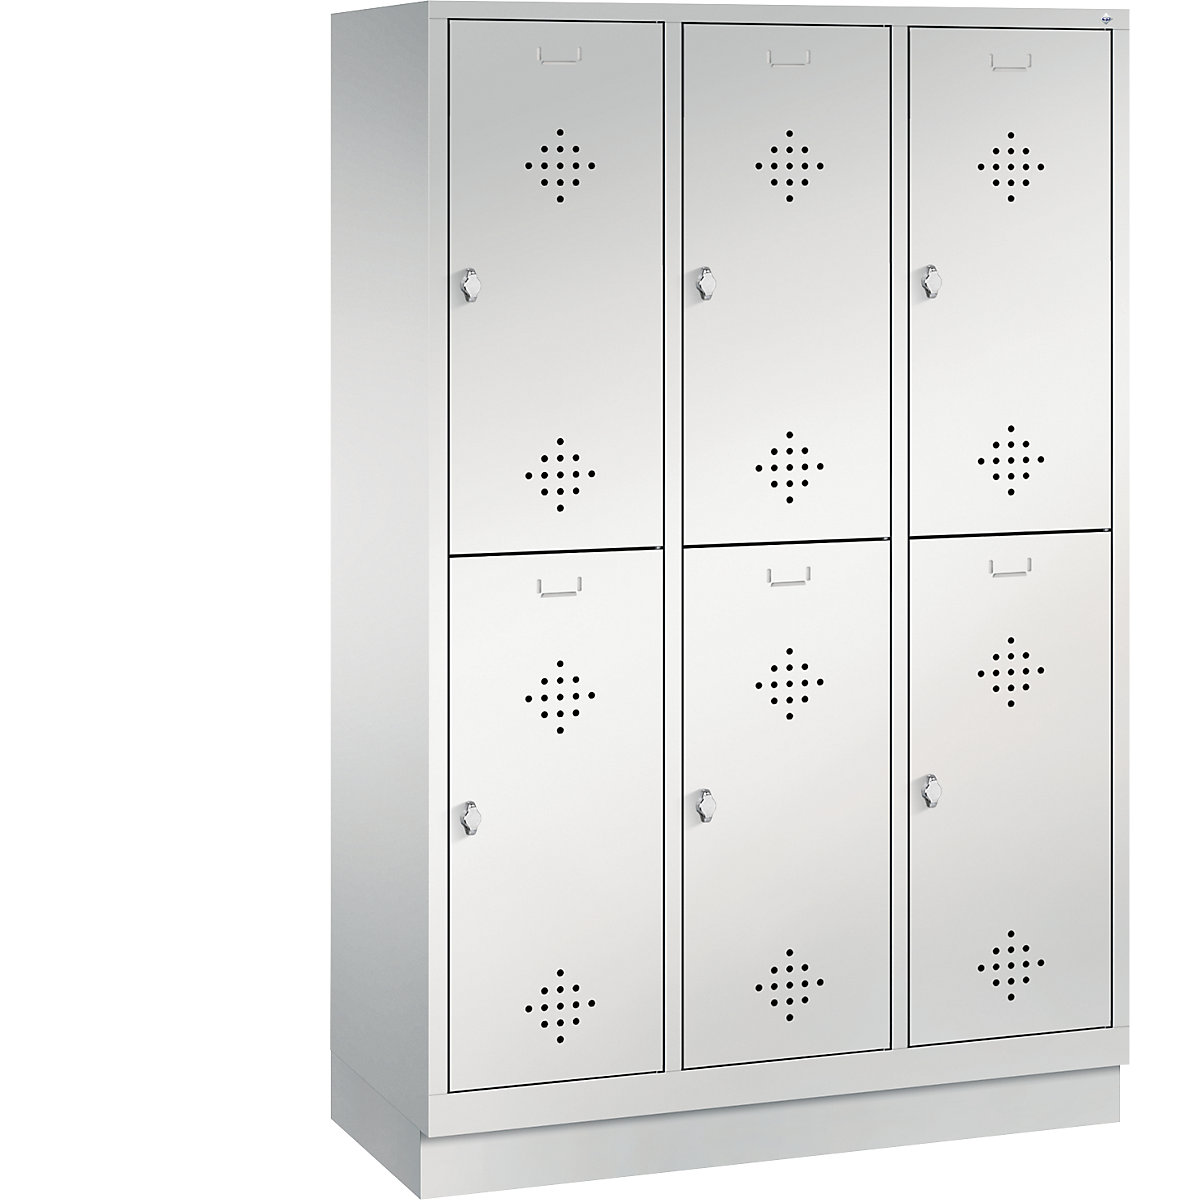 CLASSIC cloakroom locker with plinth, double tier – C+P, 3 compartments, 2 shelf compartments each, compartment width 400 mm, light grey-8